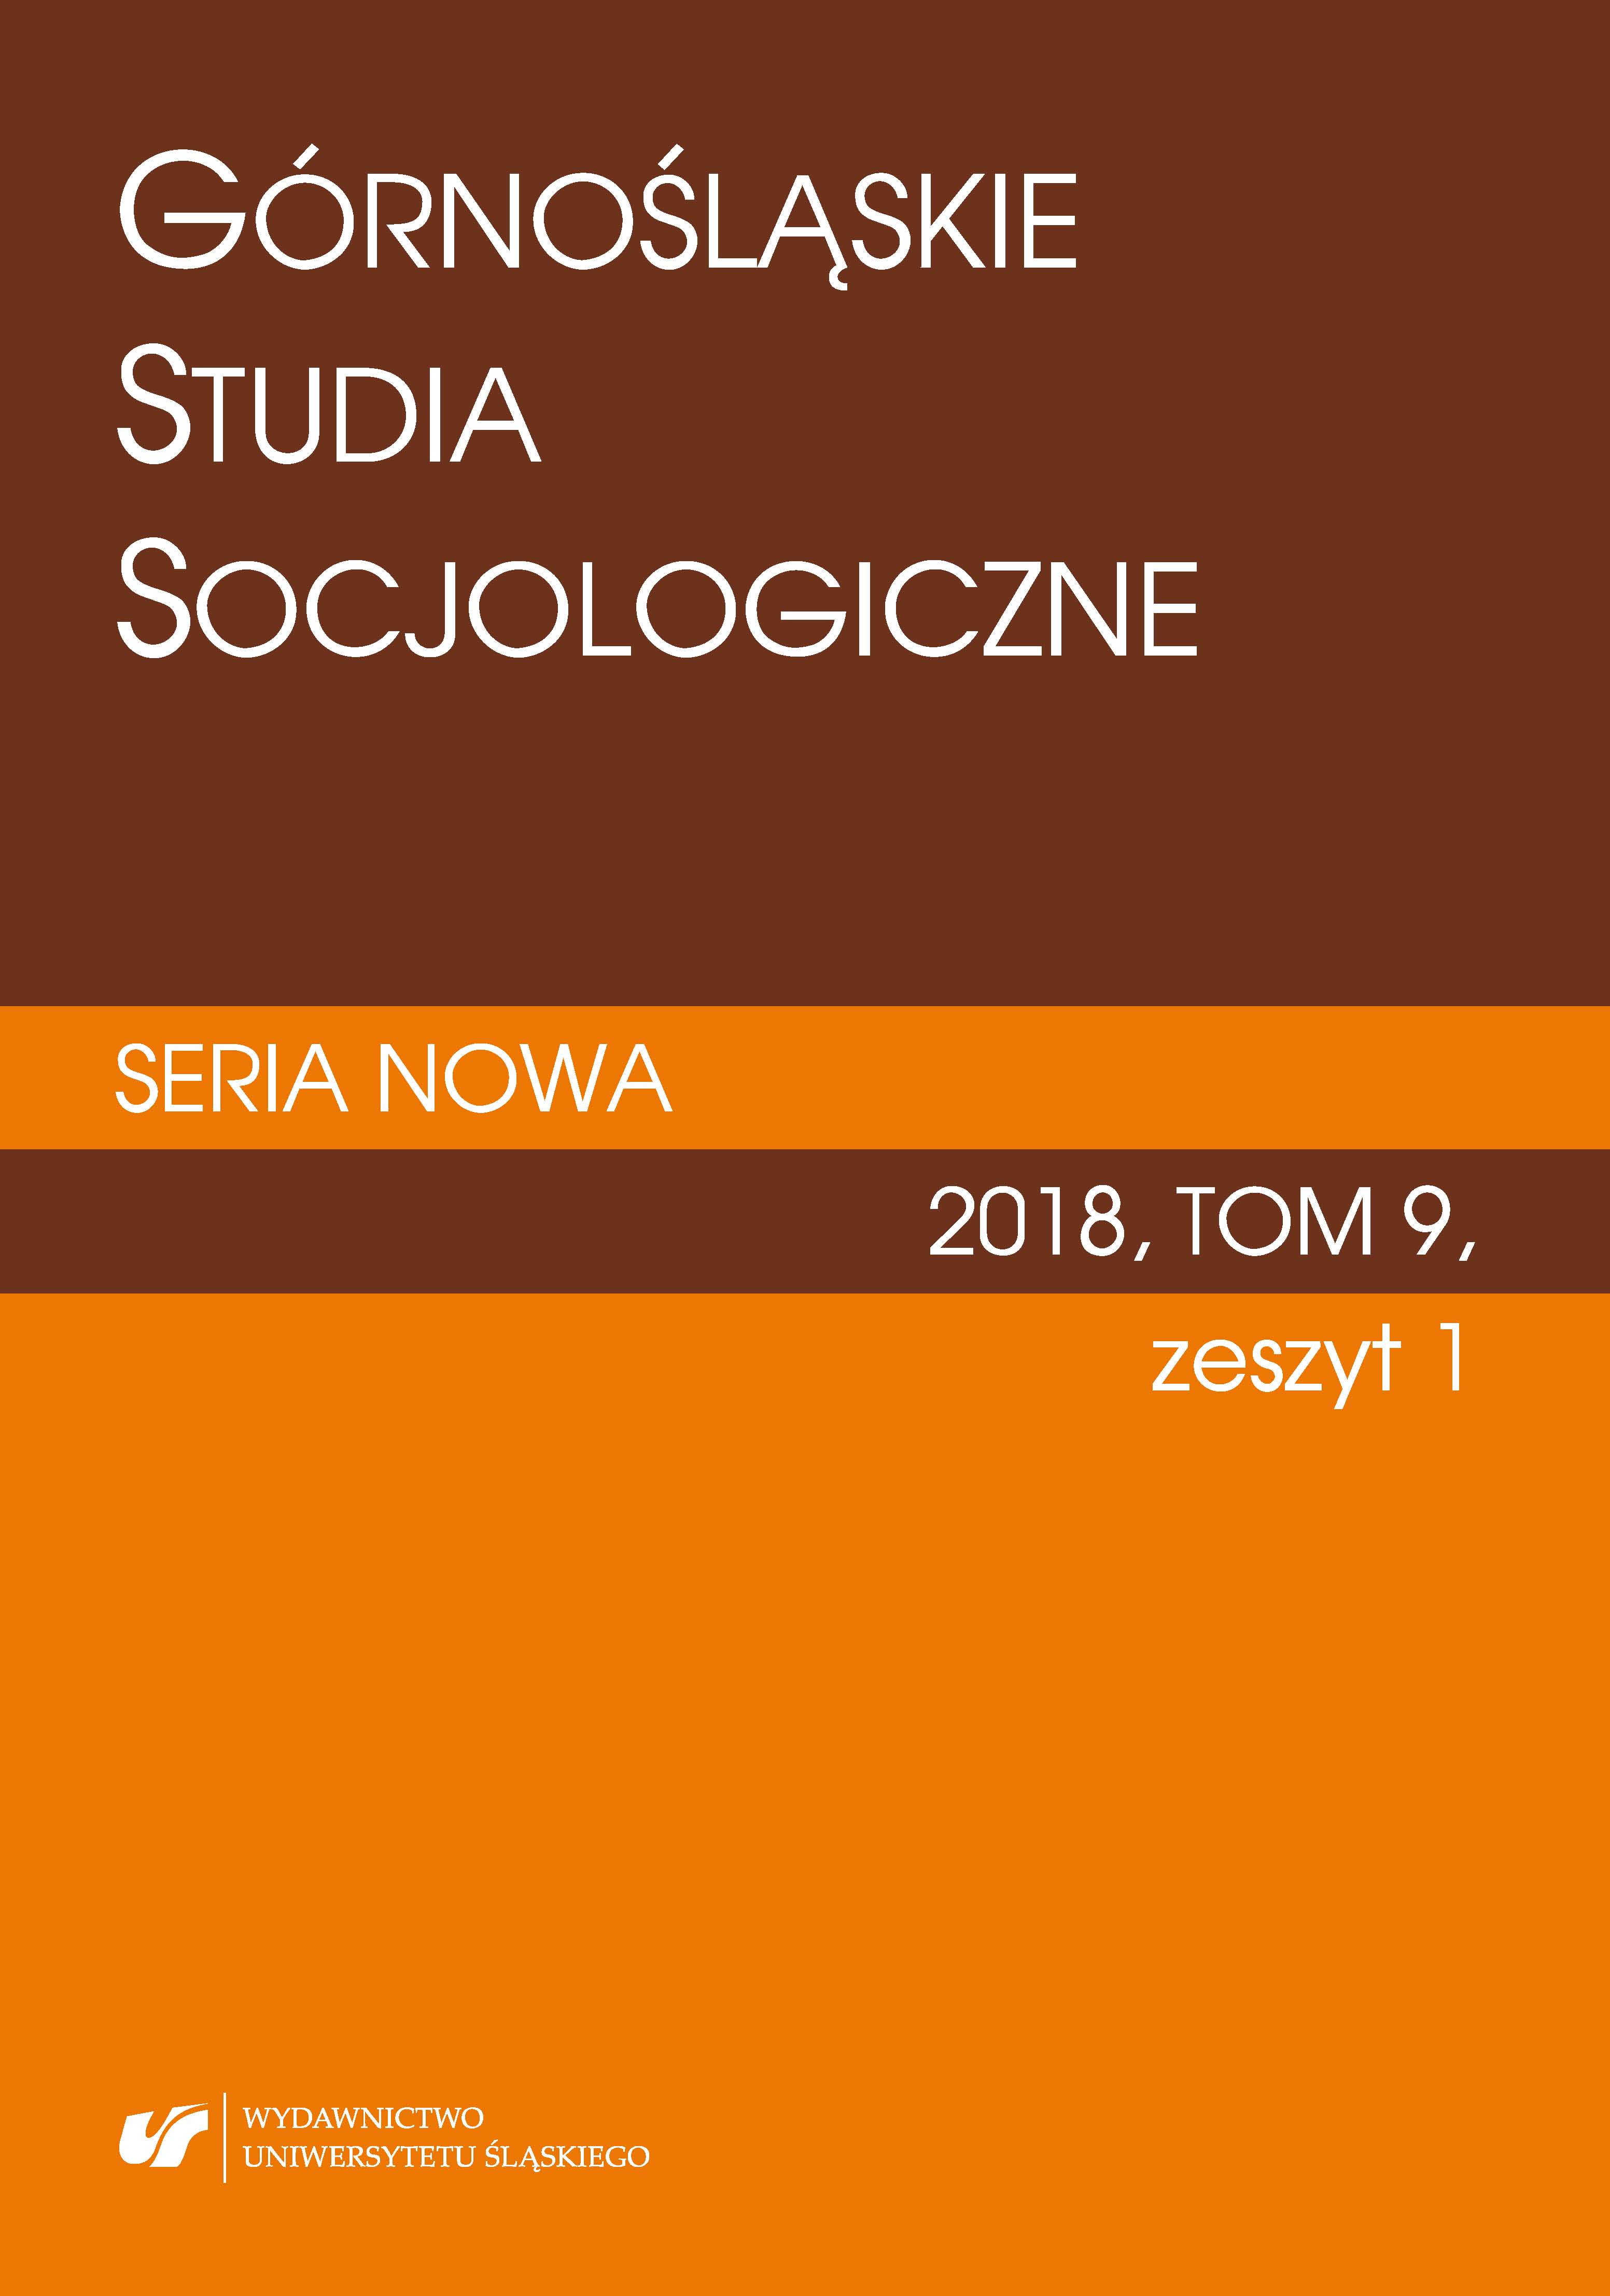 The Situation of Sociology Graduates in the Labor Market in Studies of Public Employment Services and the Analysis of Their Professional Fates. The Problem in the Silesian Province Cover Image